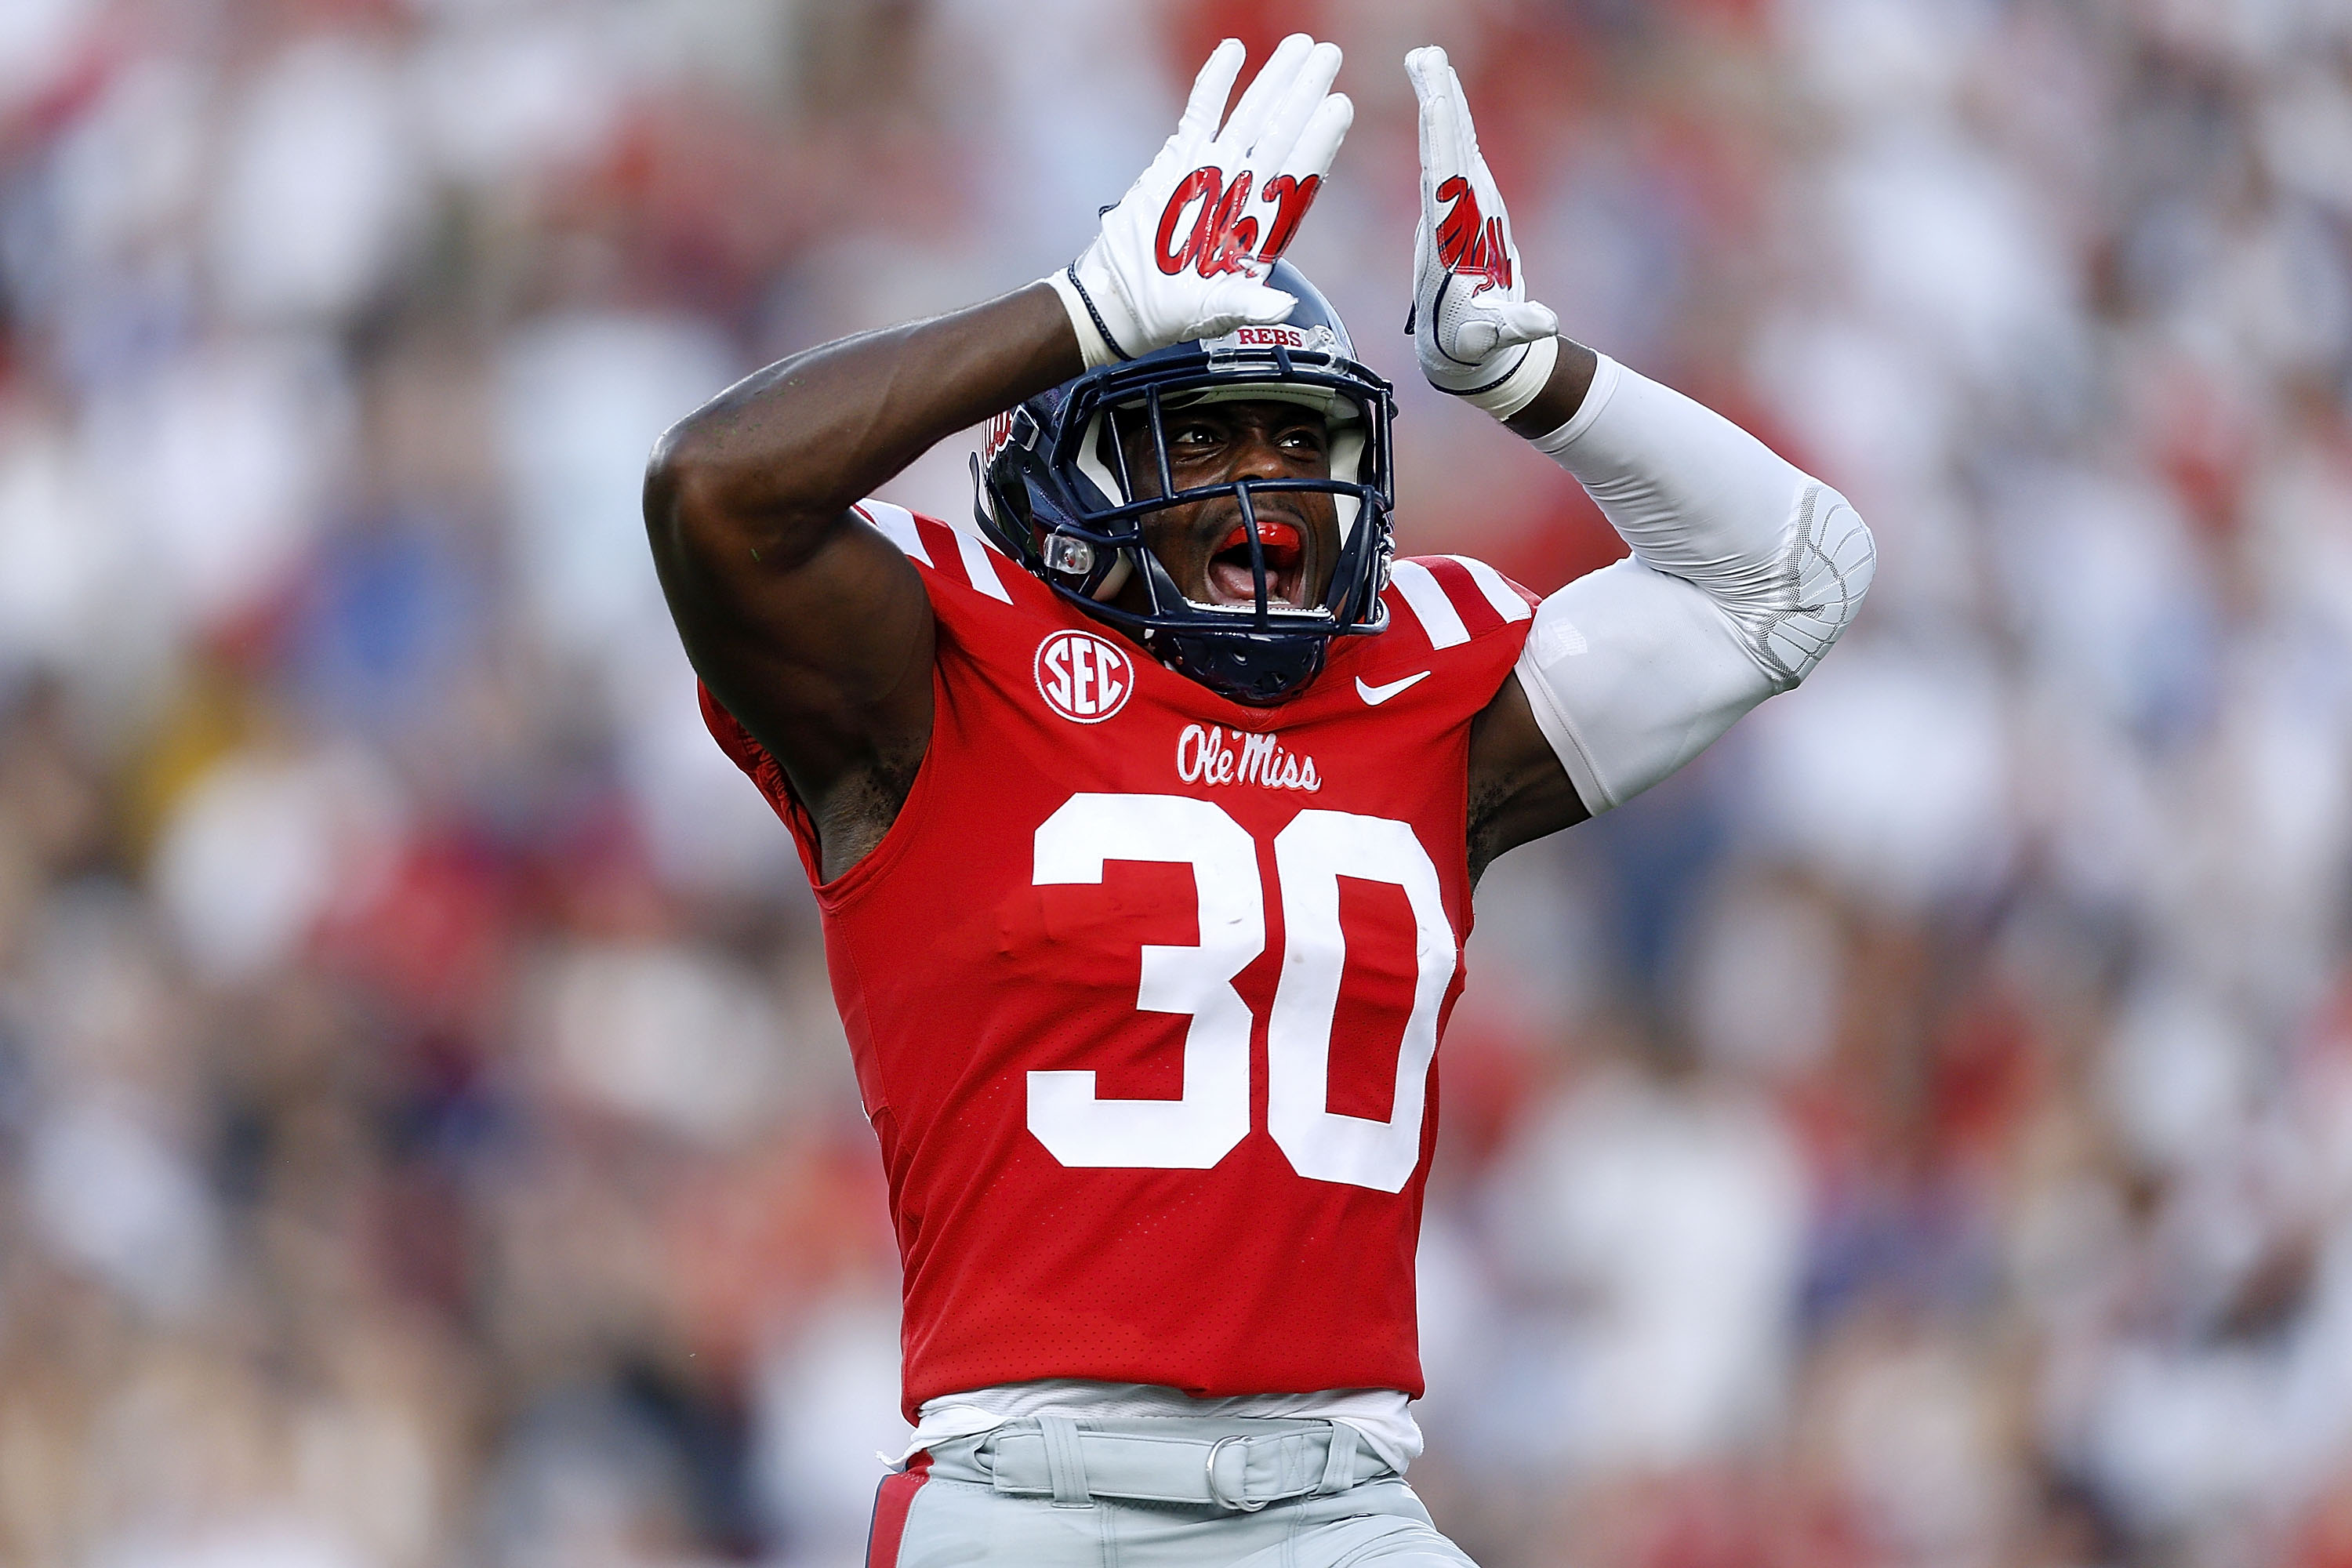 Ole Miss Football: Five Red-shirt Freshmen We Are Ready To See Play